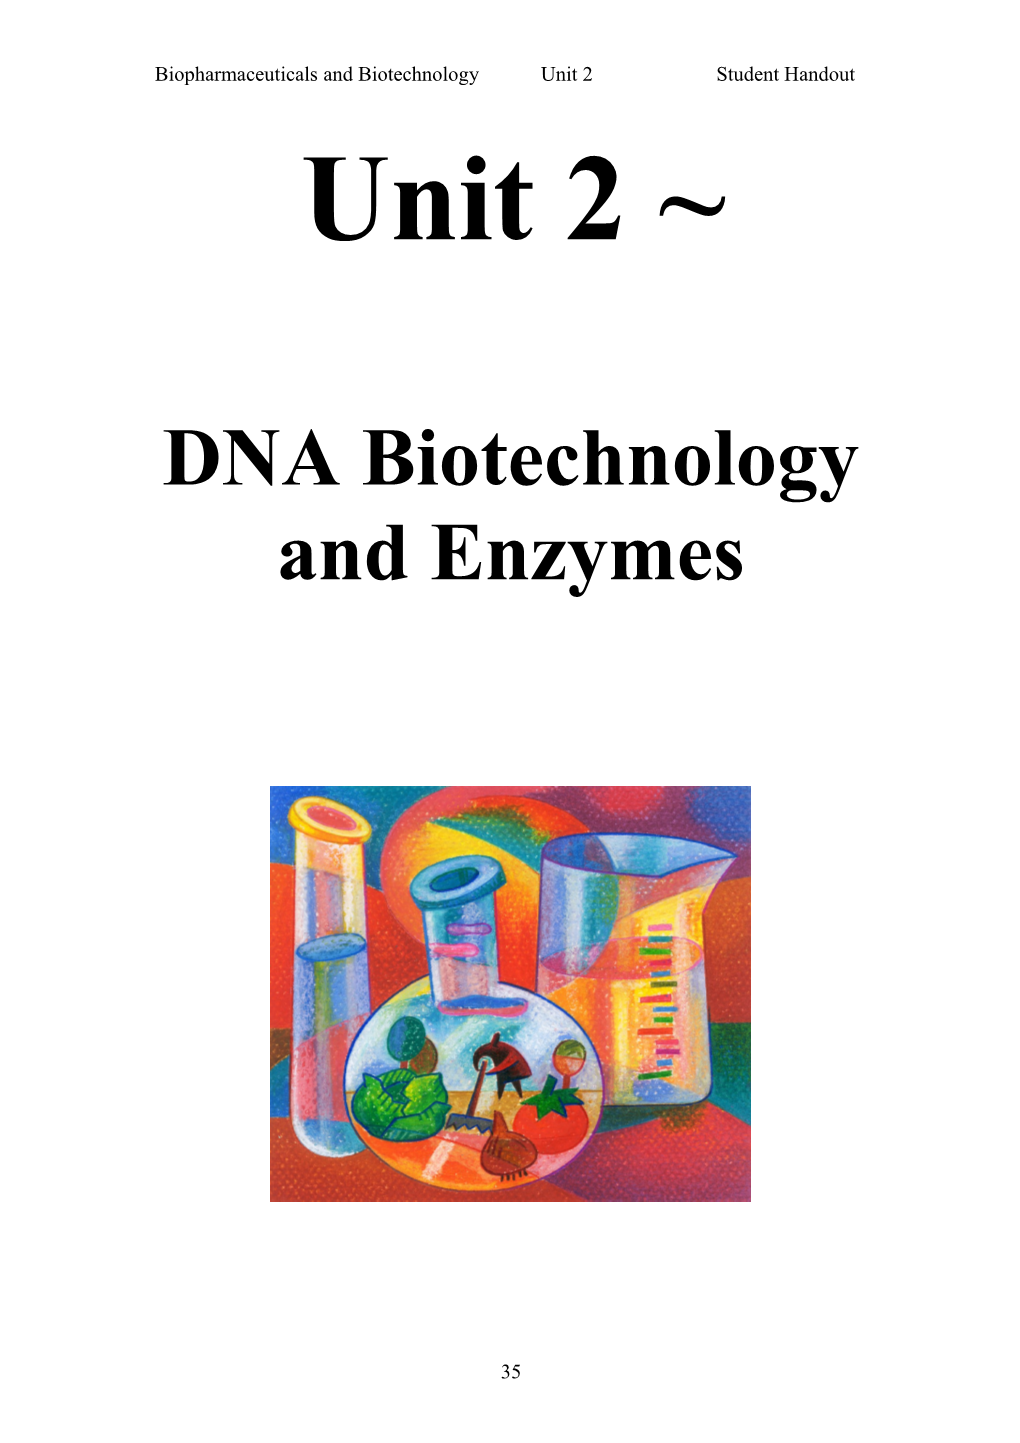 Biopharmaceuticals and Biotechnology Unit 2 Student Handout